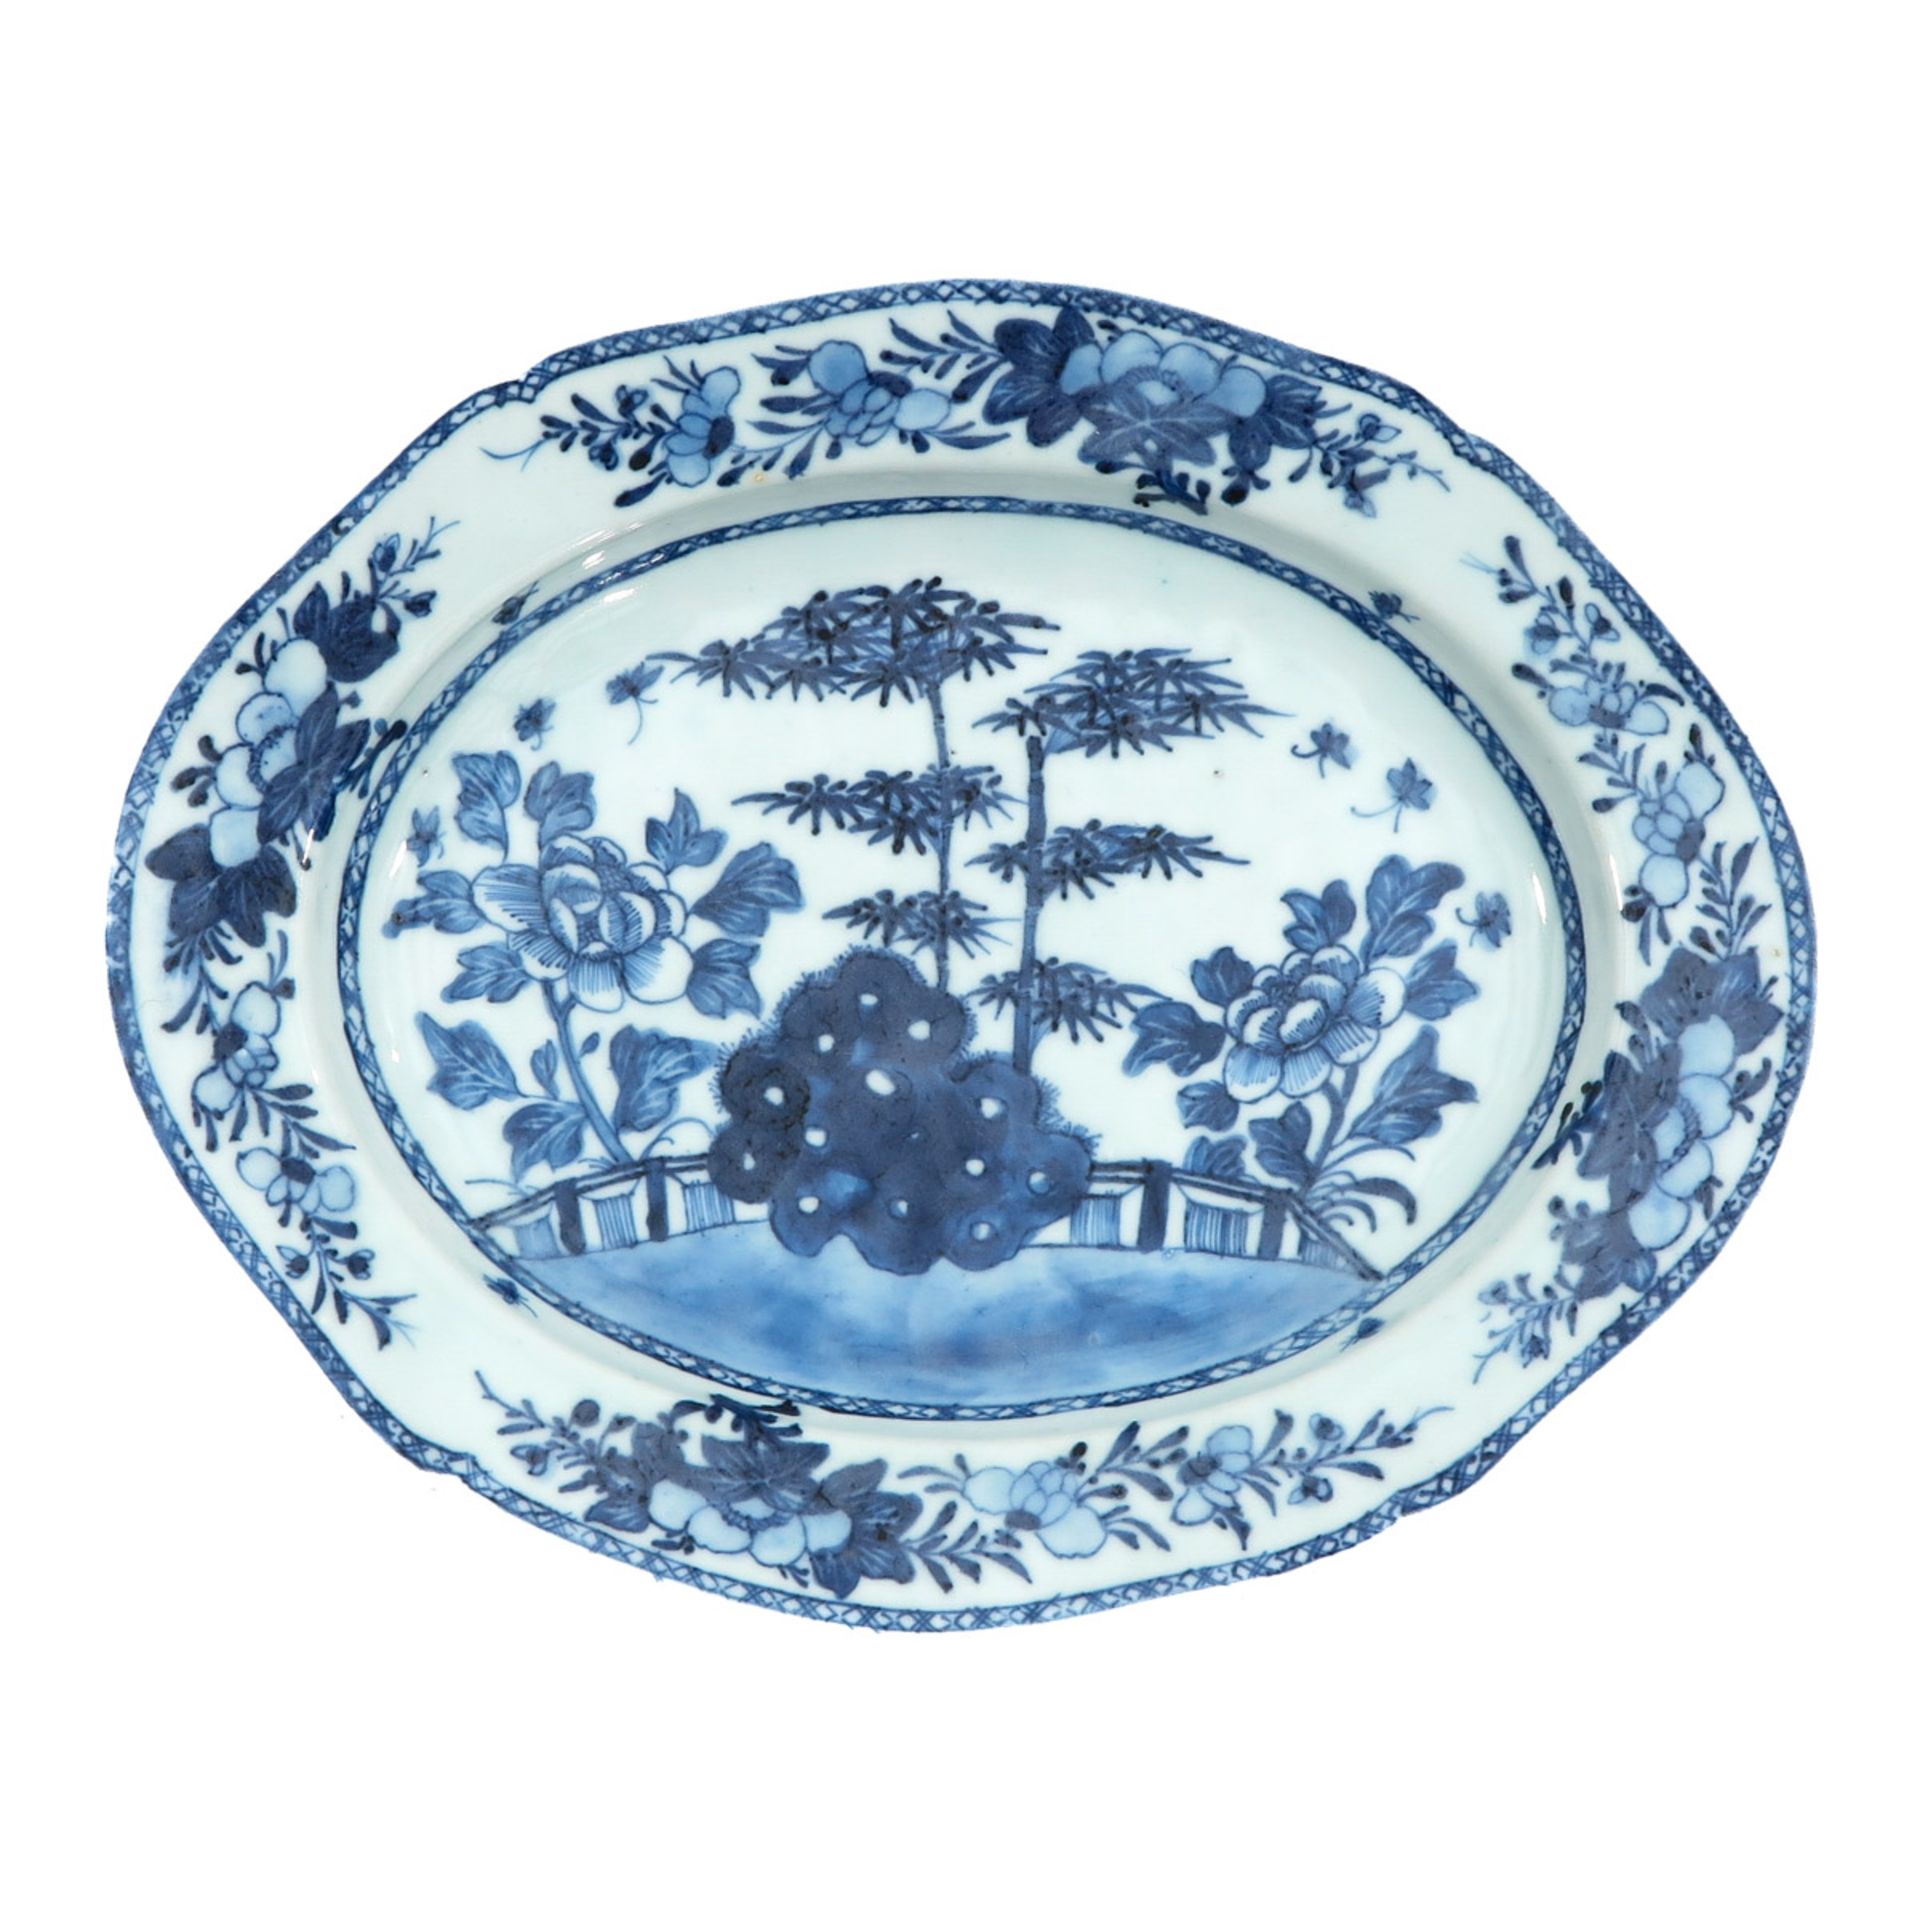 A Pair of Blue and White Serving Trays - Image 5 of 9